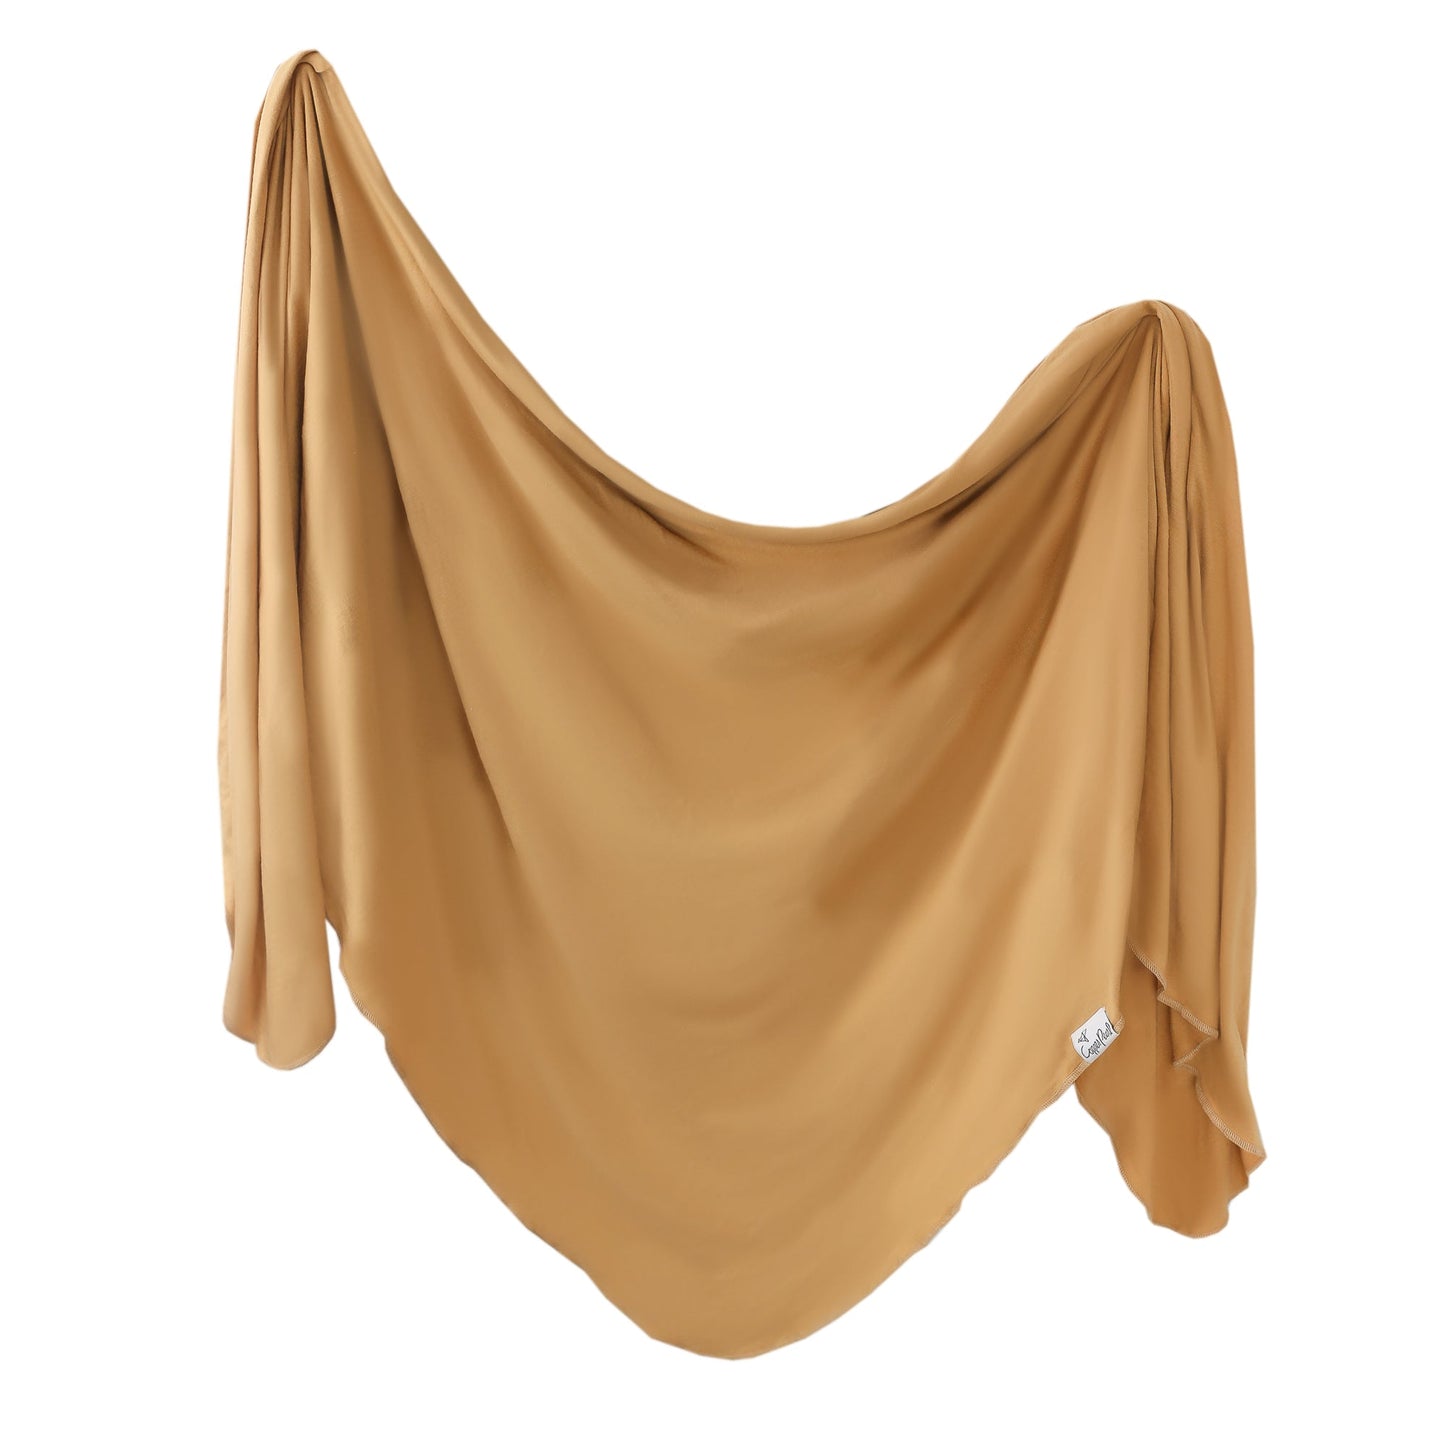 Cooper Pearl-Dune Knit Swaddle Blanket